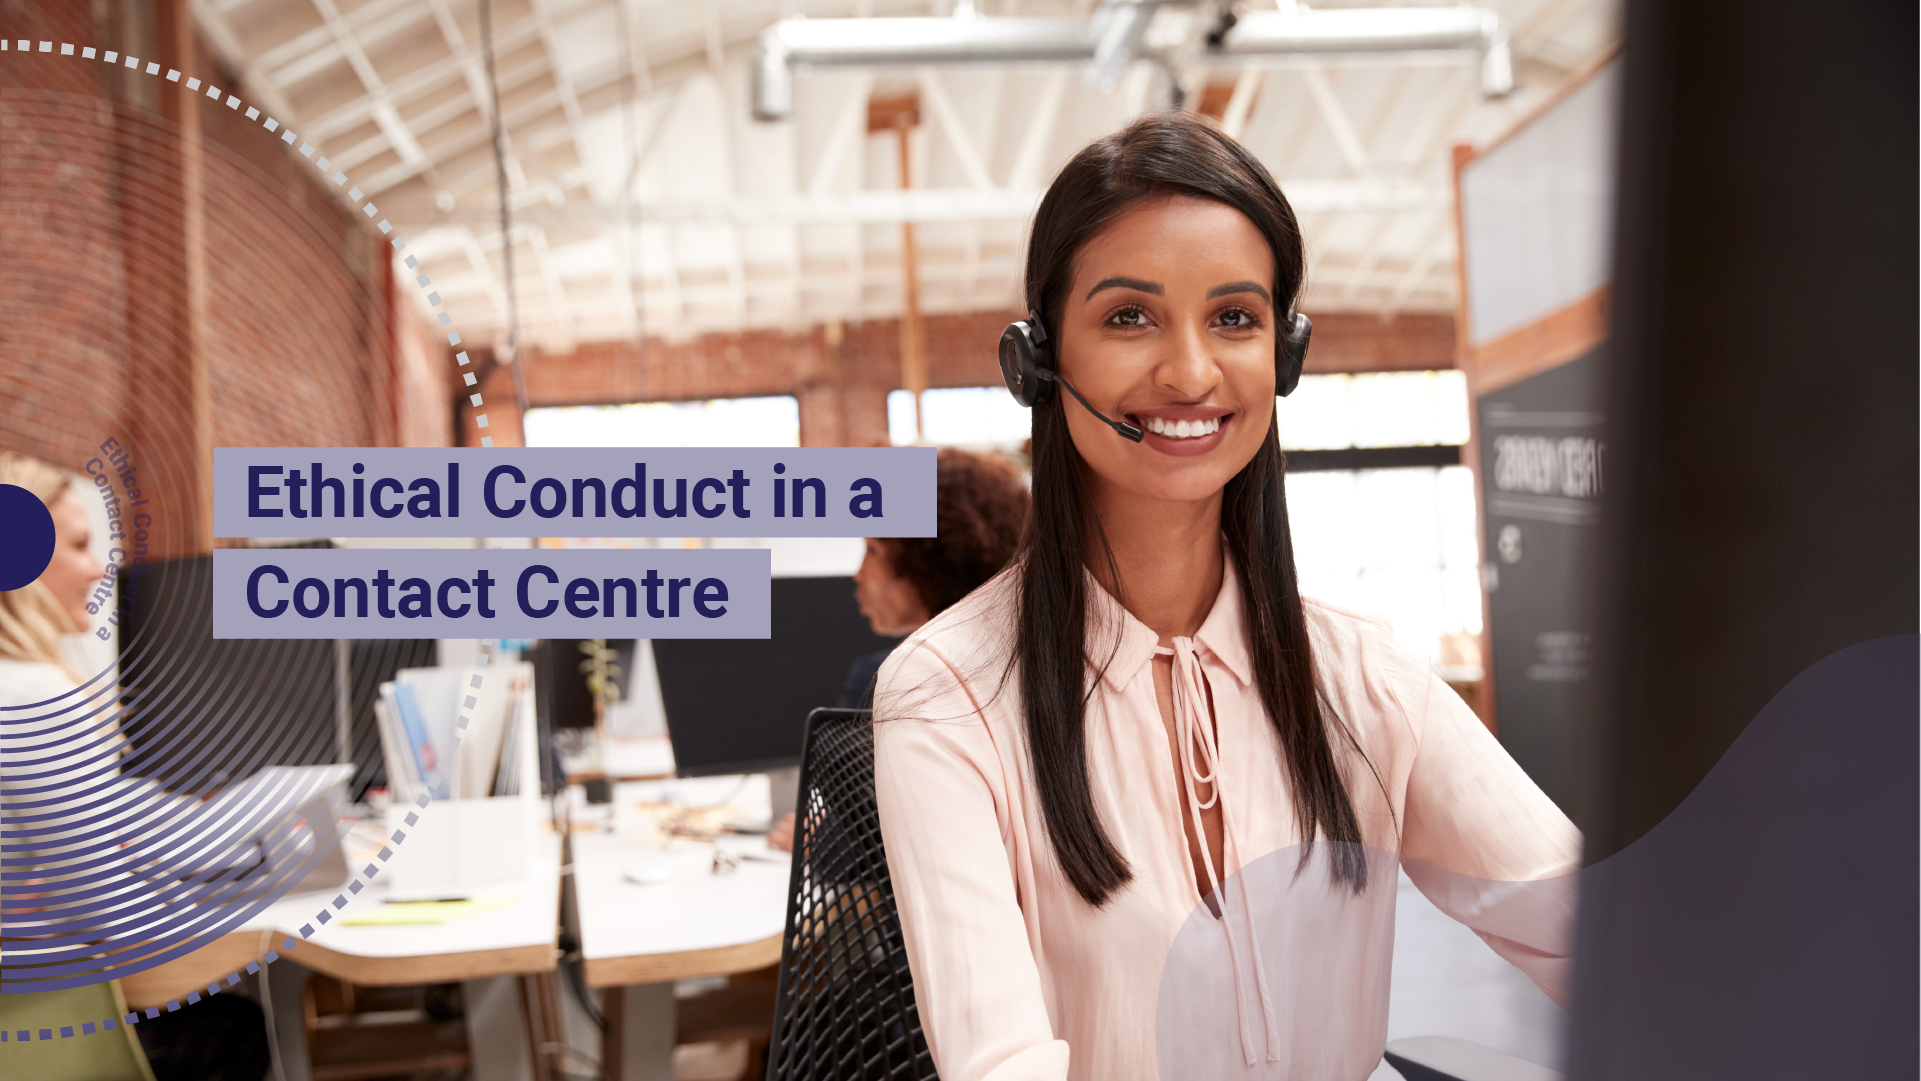 https://omnistackconnect.omnihrc.com/product/ethical-conduct-in-a-contact-centre